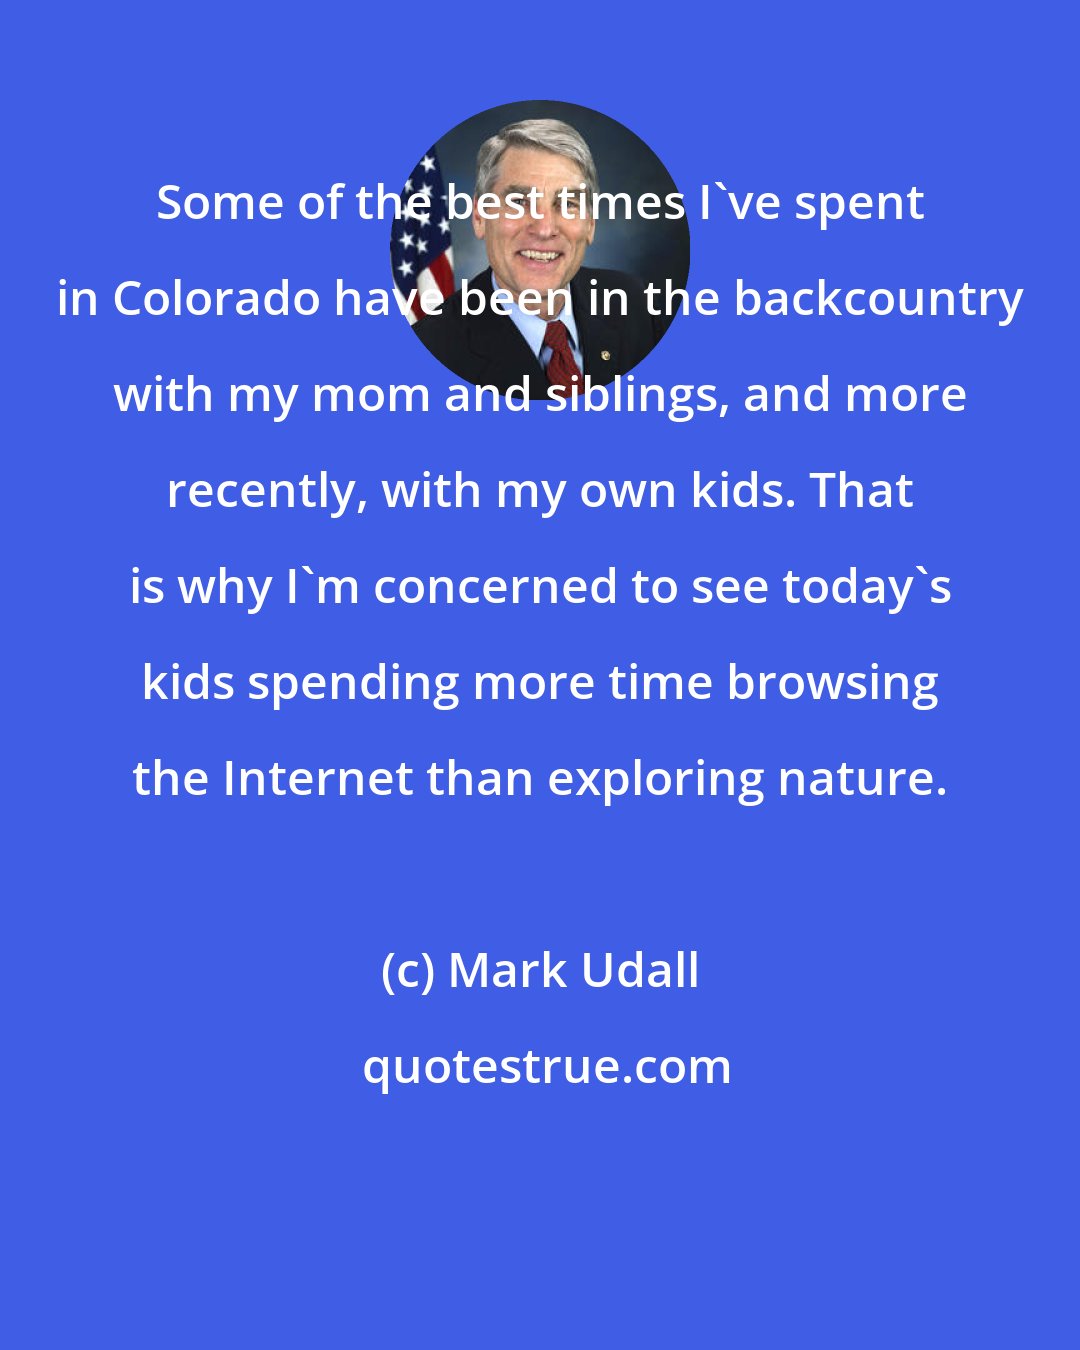 Mark Udall: Some of the best times I've spent in Colorado have been in the backcountry with my mom and siblings, and more recently, with my own kids. That is why I'm concerned to see today's kids spending more time browsing the Internet than exploring nature.